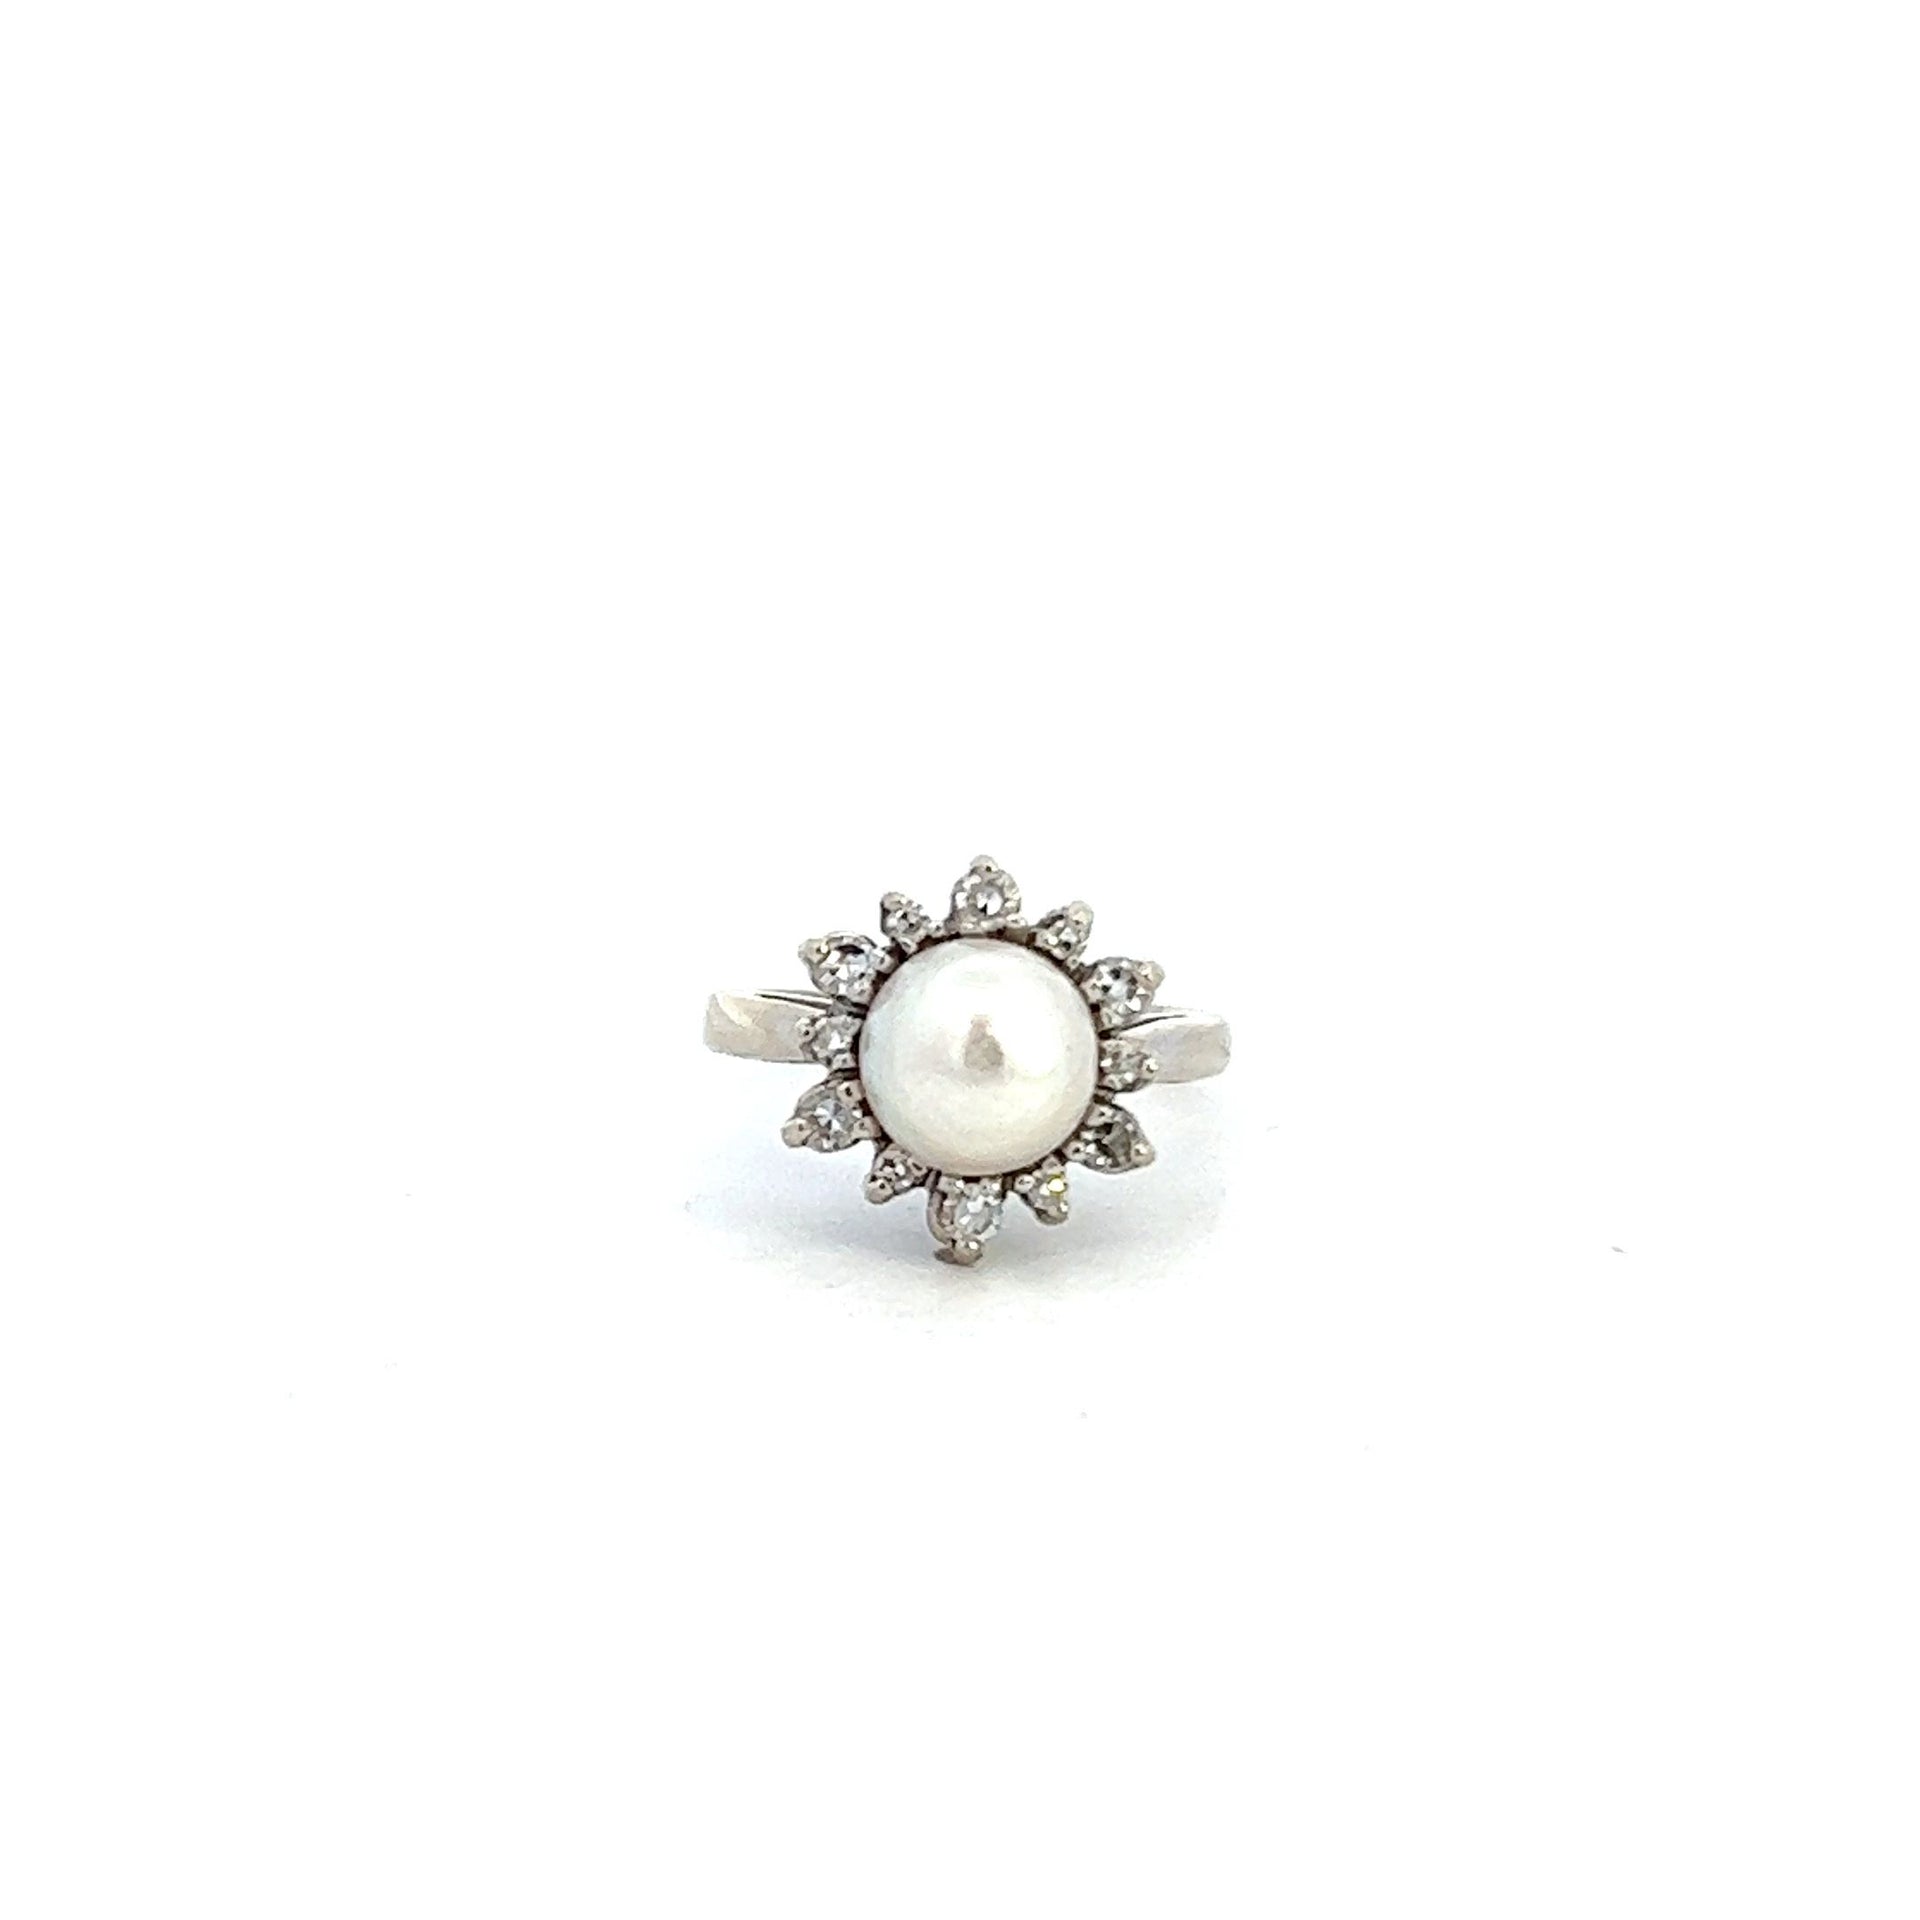 ANTIQUE 14KT WHITE GOLD 7.8MM GENUINE WHITE PEARL AND DIAMOND RING.